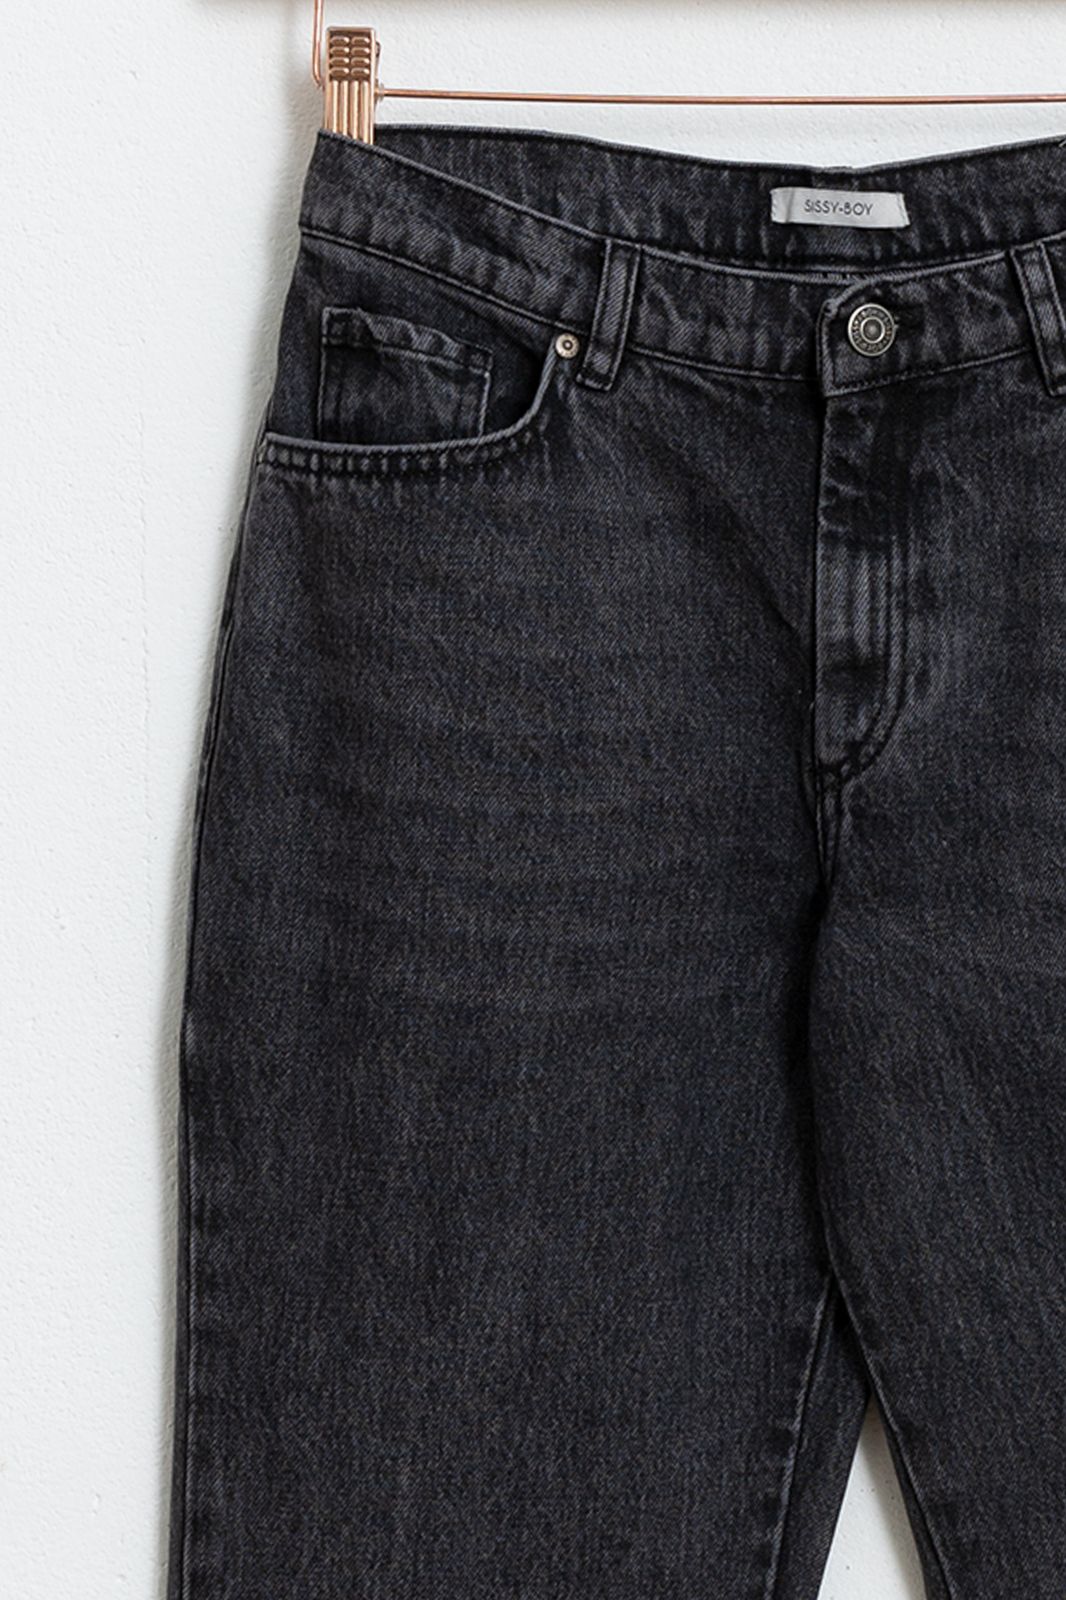 Bari washed black tapered jeans